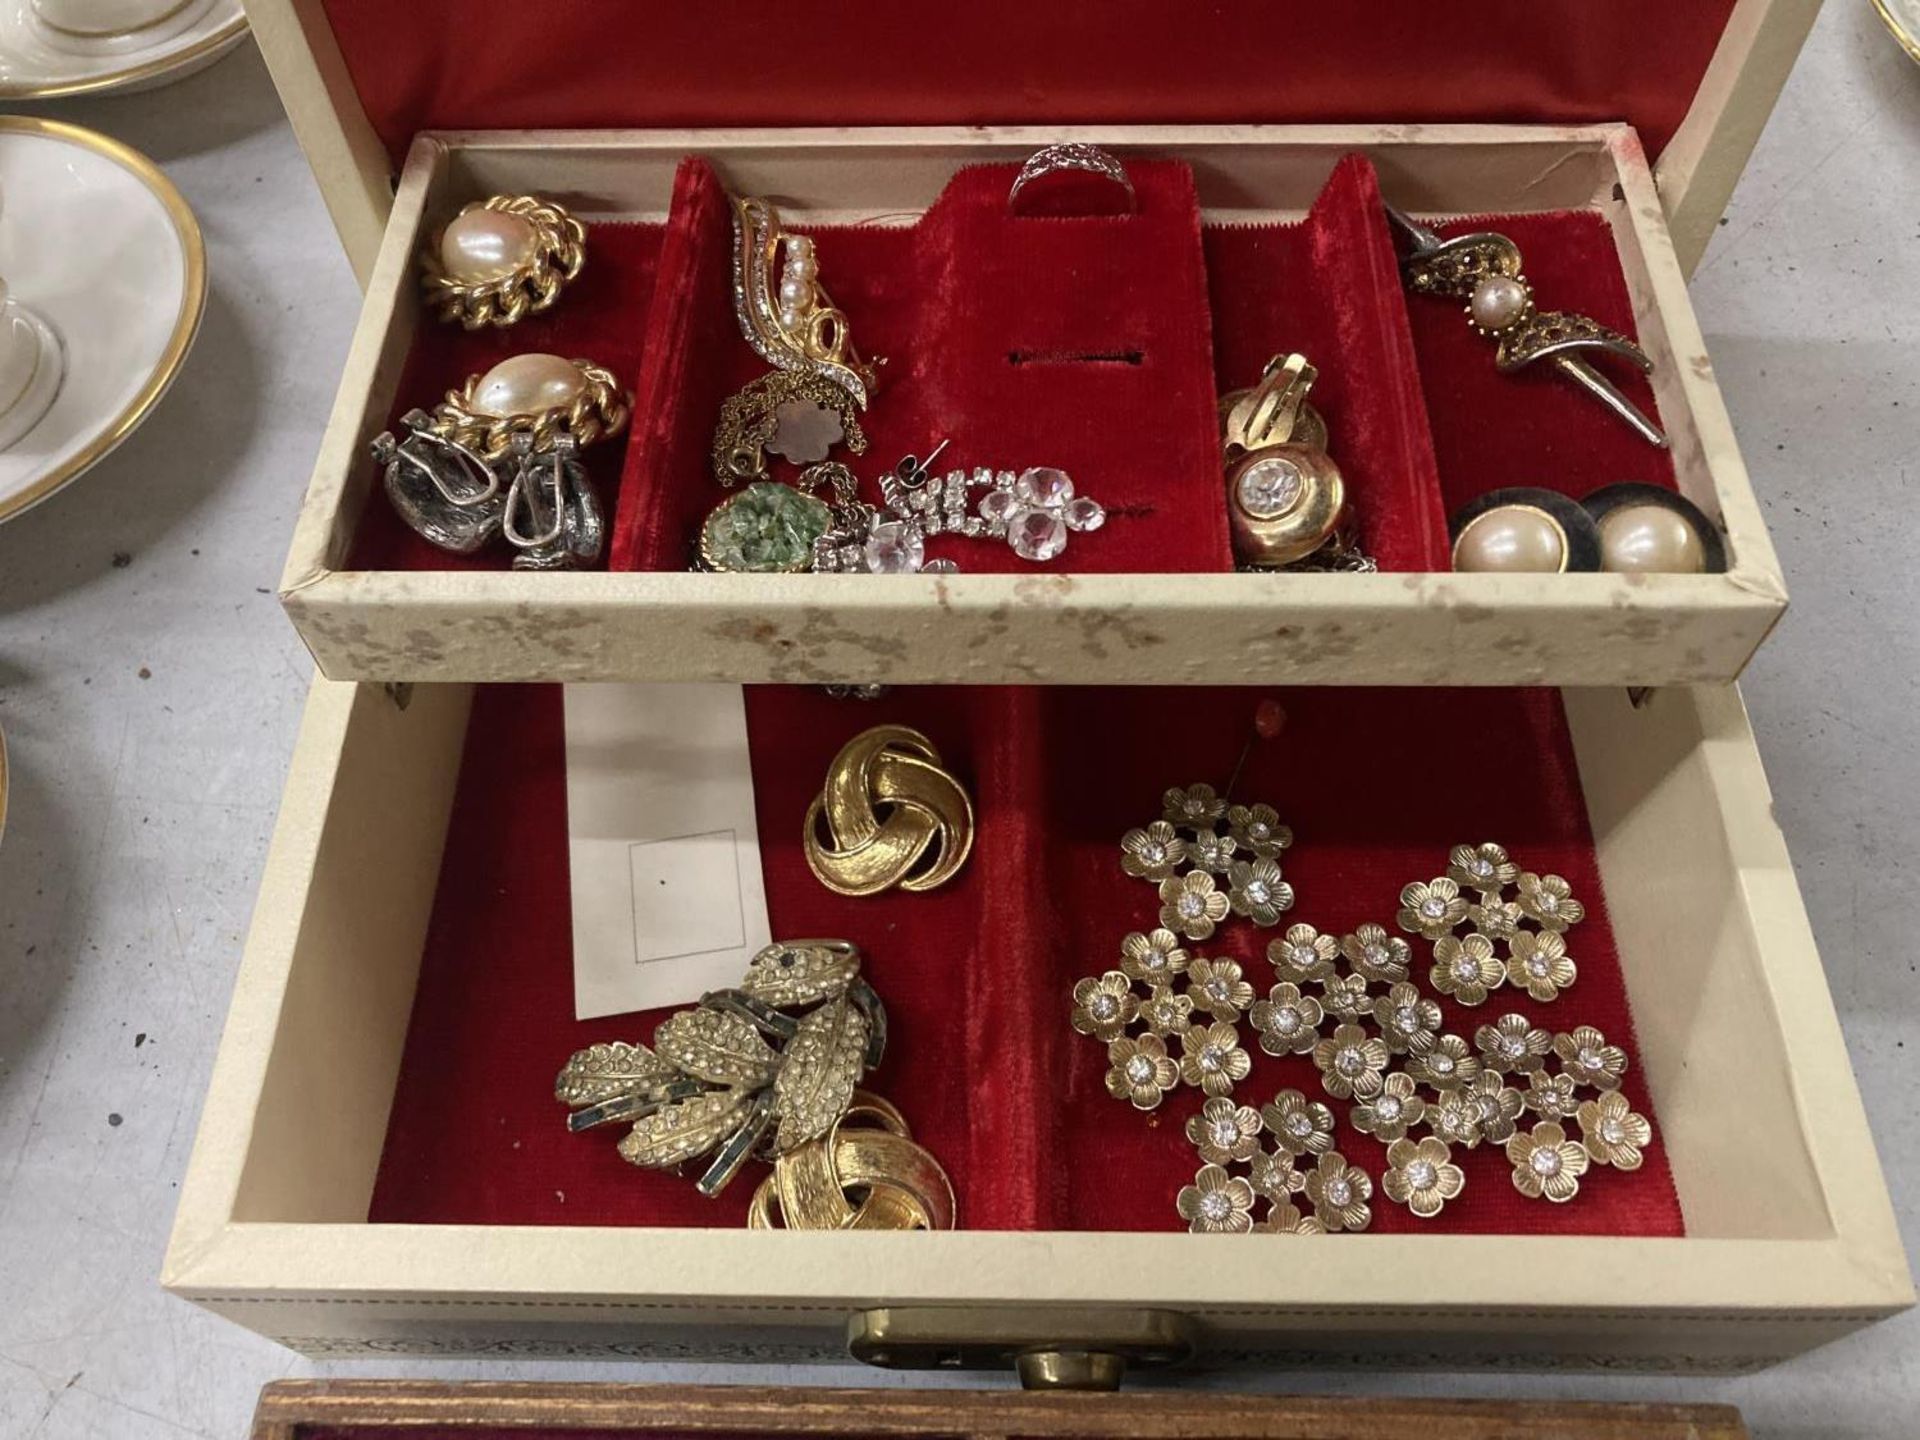 TWO JEWELLERY BOXES TO CONTAIN A LARGE QUANTITY OF COSTUME JEWELLERY - Image 4 of 5